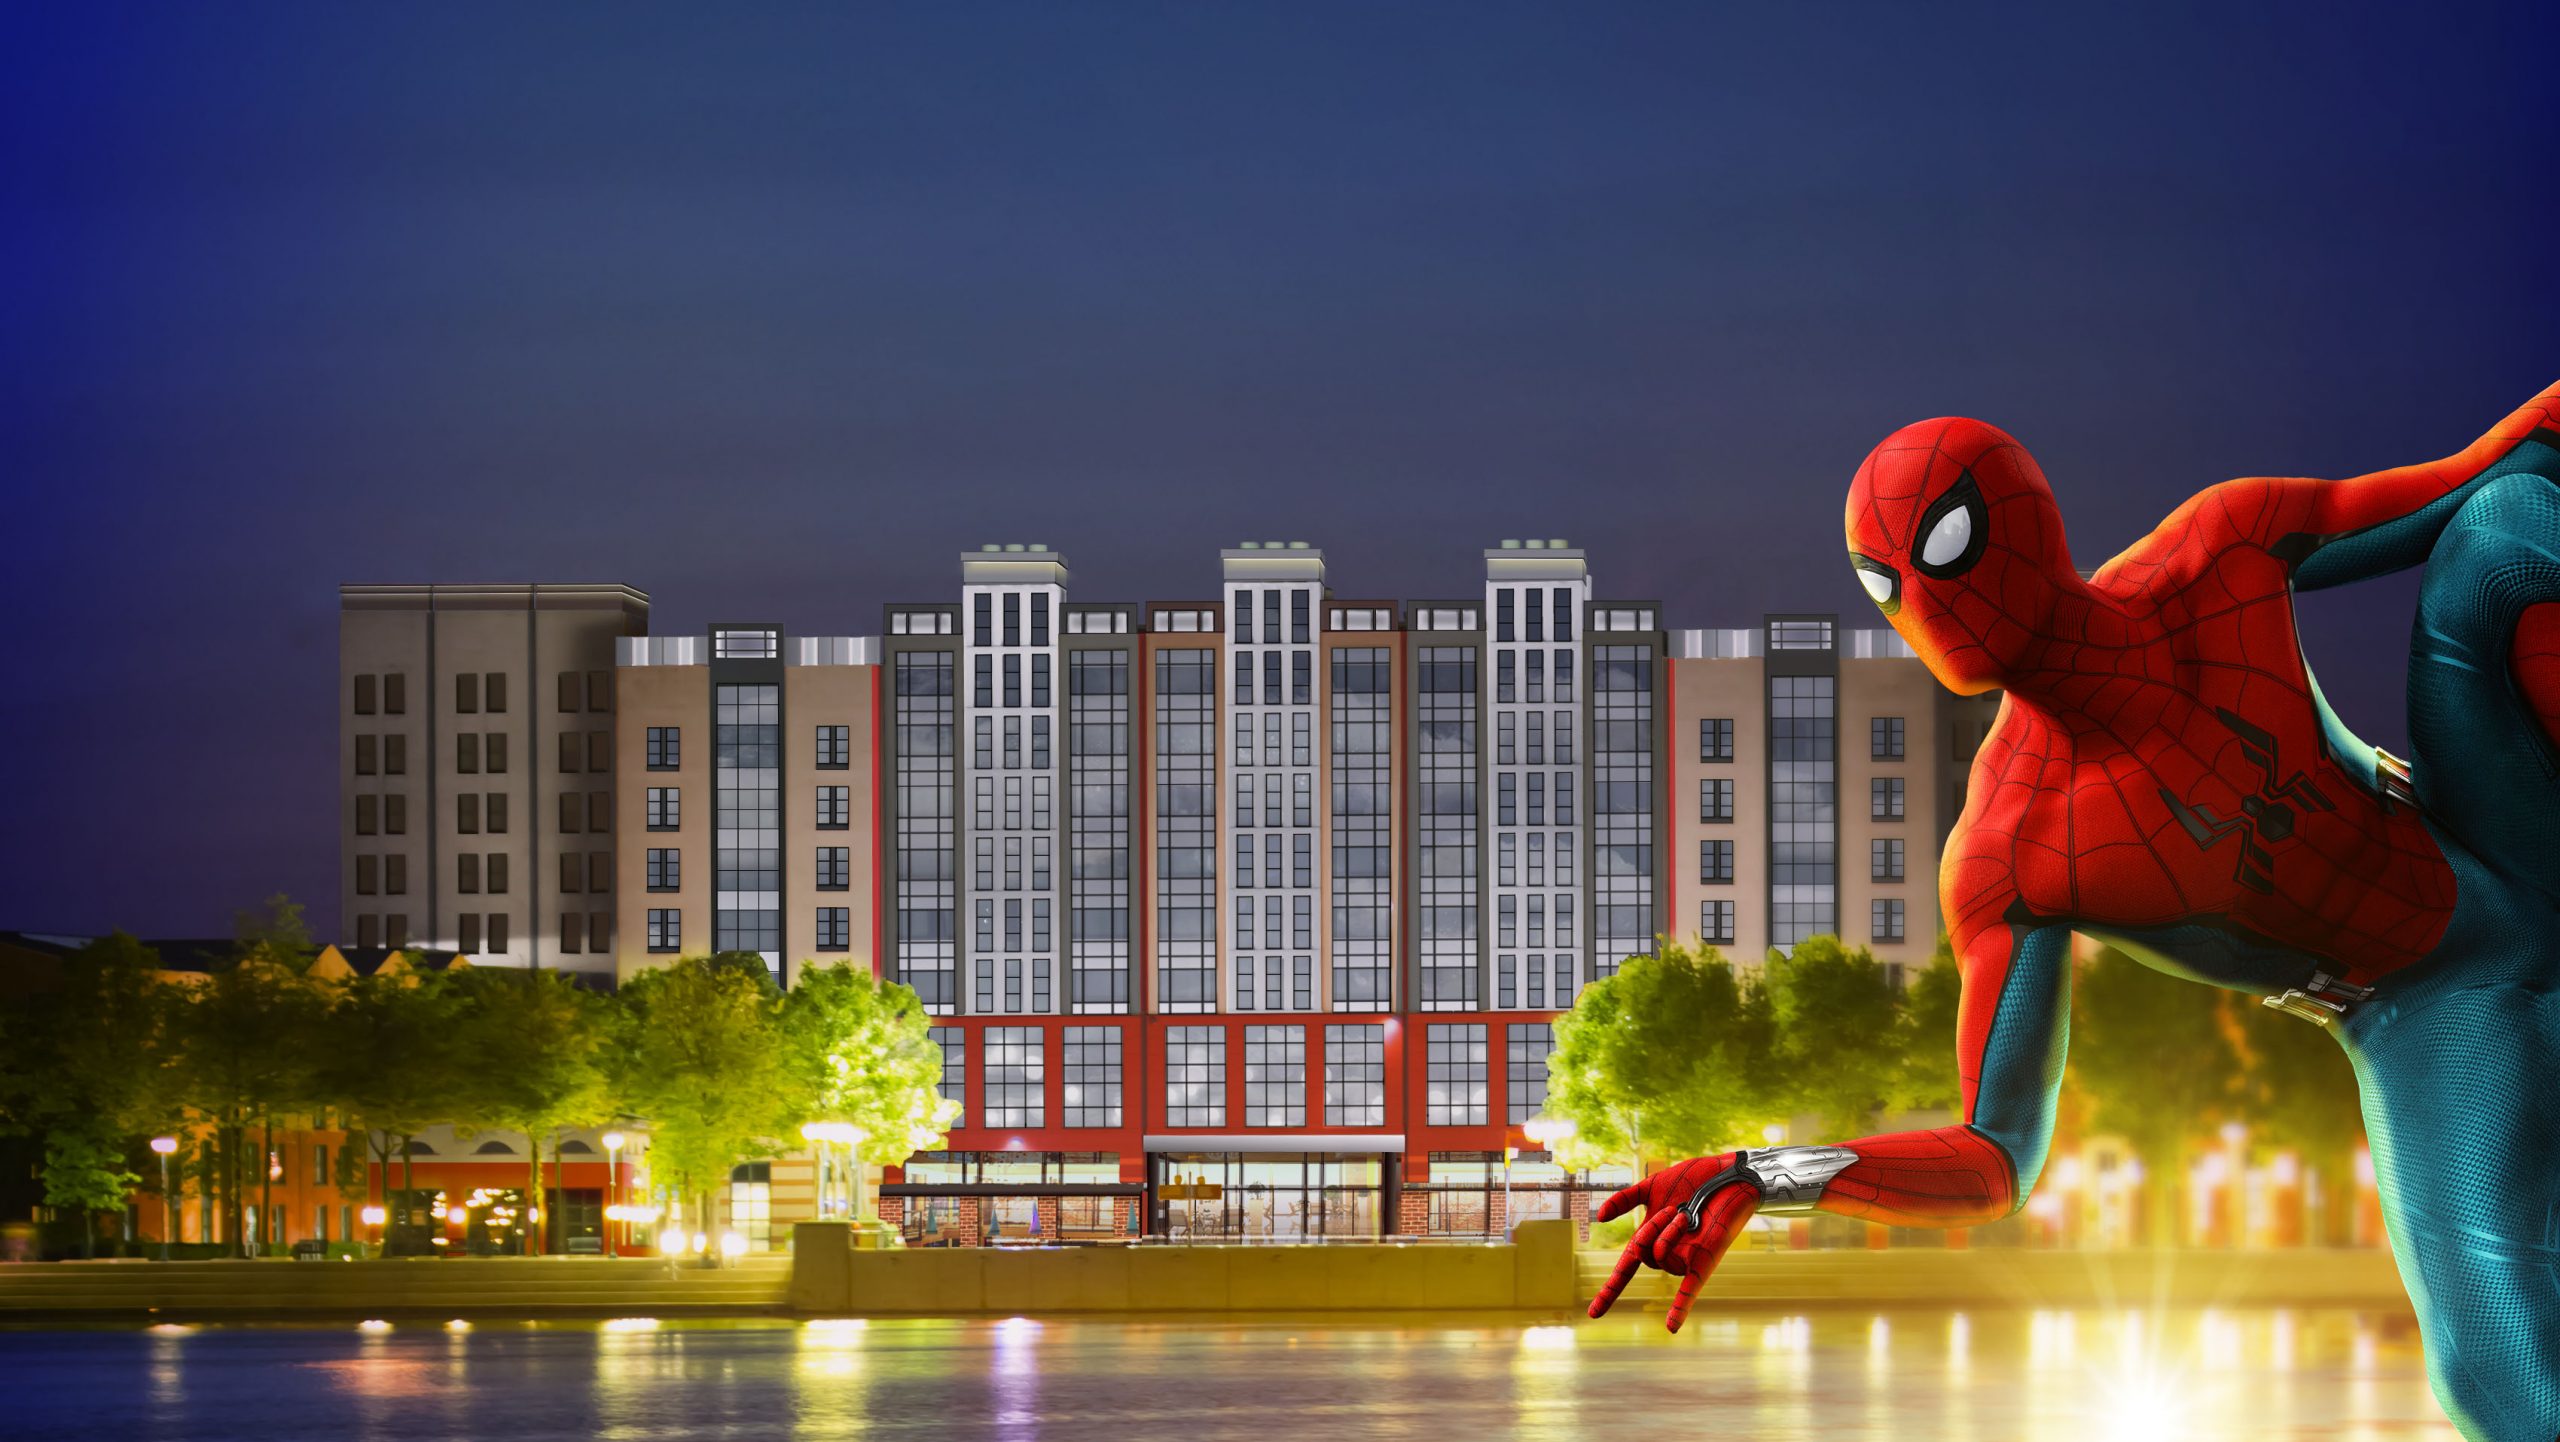 You are currently viewing 27.05.2021 – Hotel New York in Disneyland Paris.